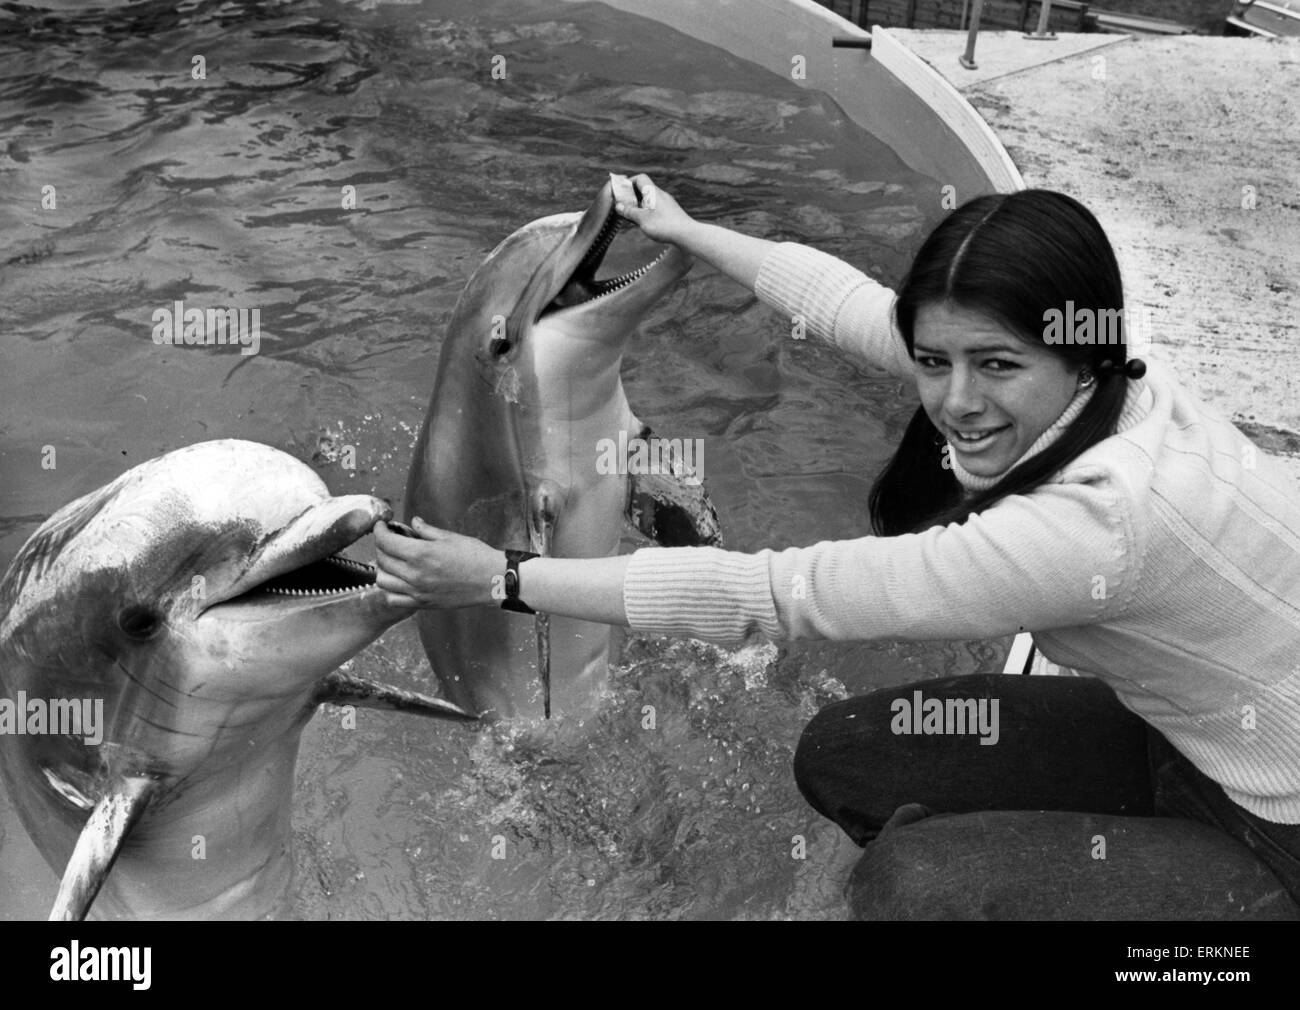 West Midland Safari and Leisure Park, located in Bewdley, Worcestershire, England. Dolphins. 12th April 1976. Stock Photo